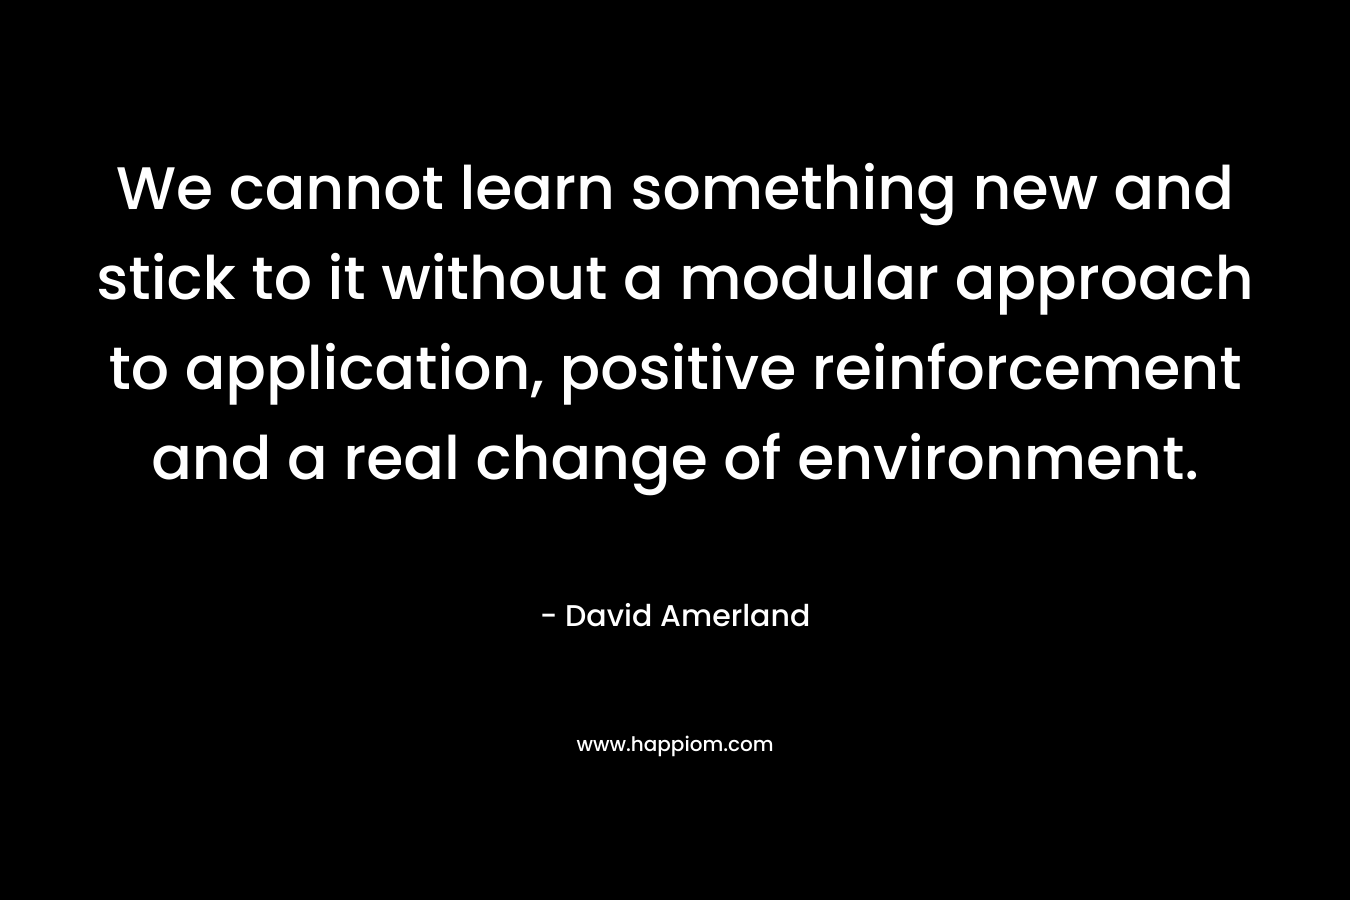 We cannot learn something new and stick to it without a modular approach to application, positive reinforcement and a real change of environment.